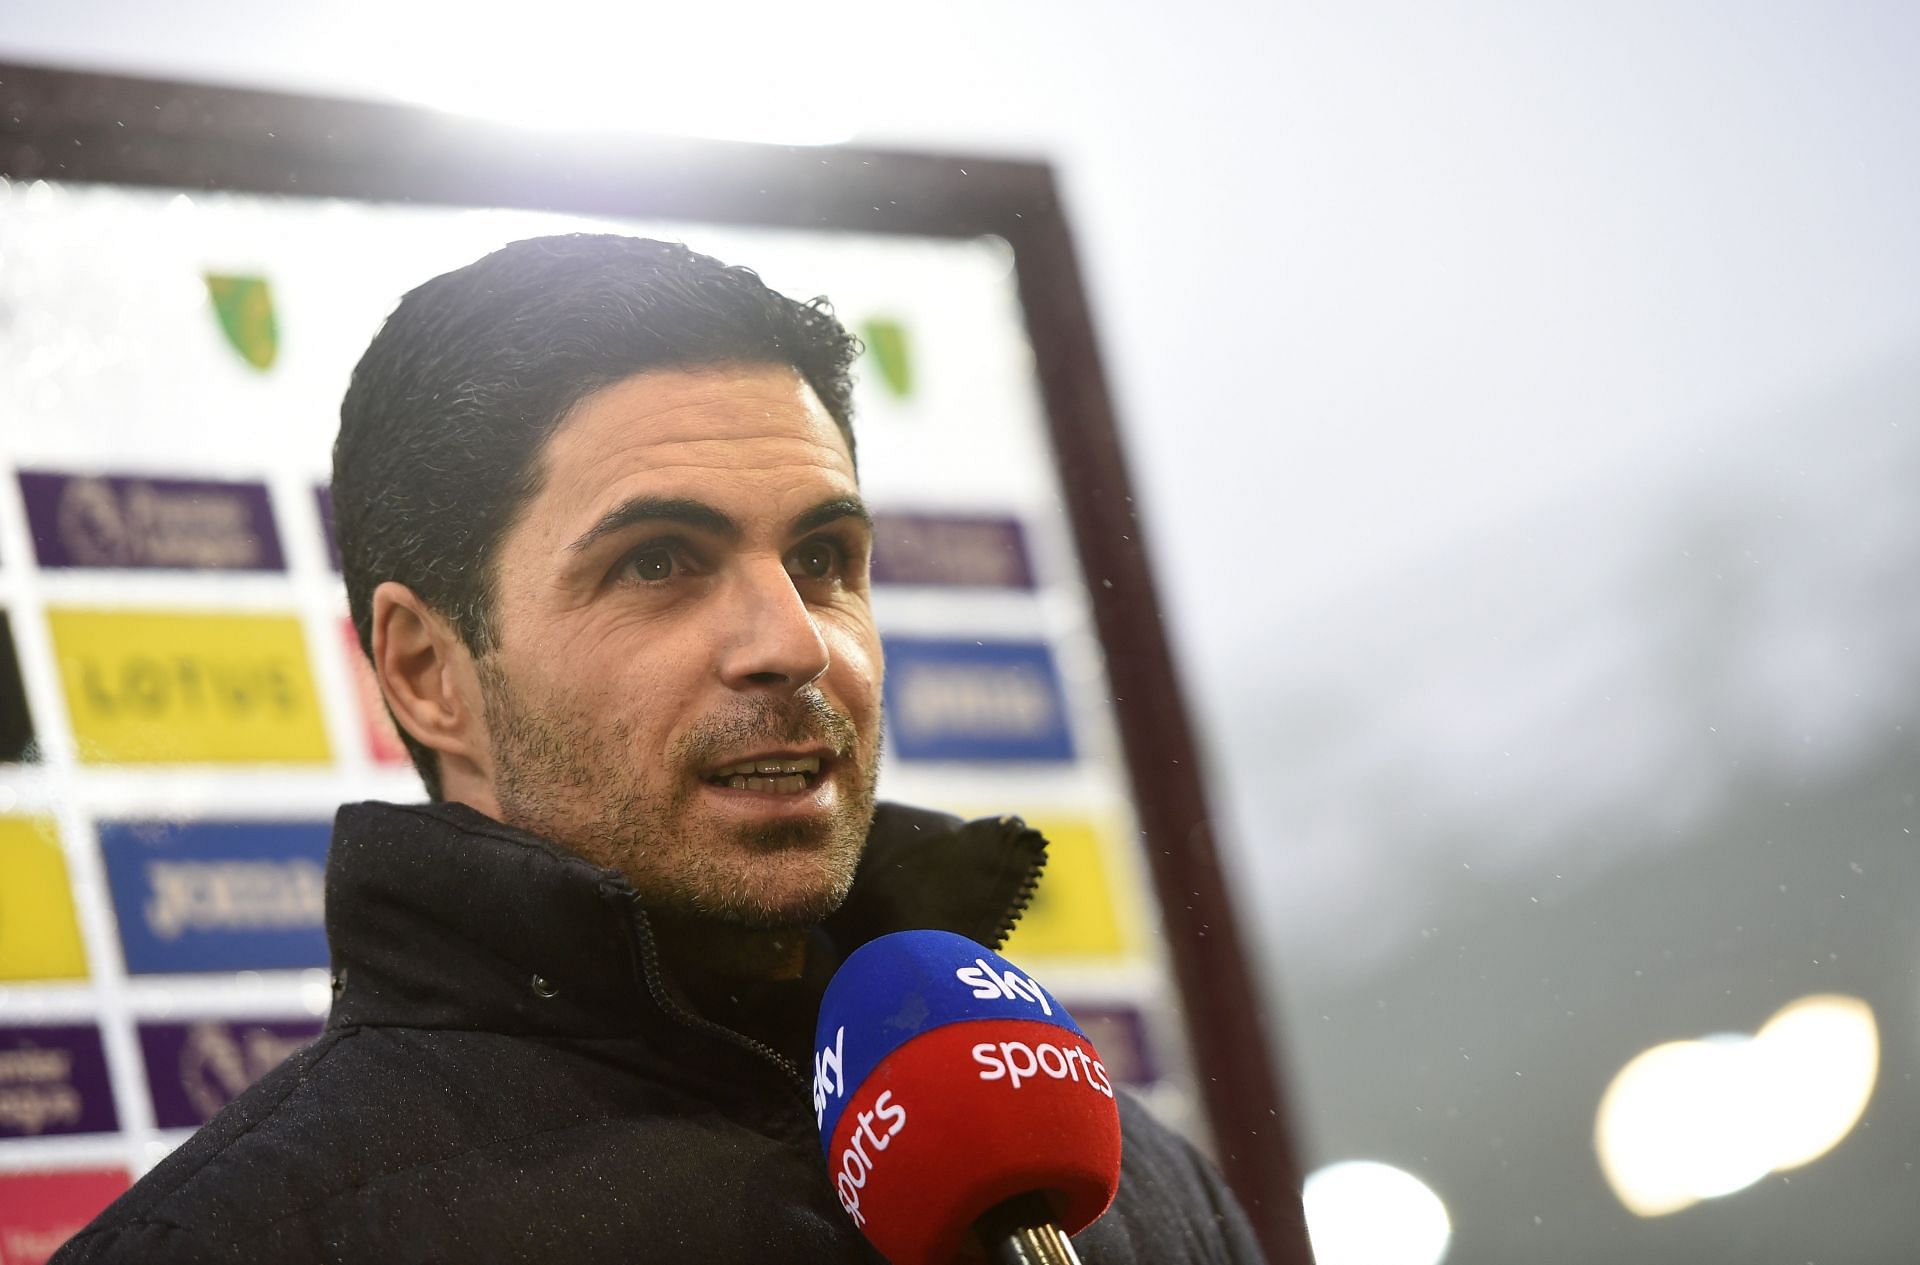 Mikel Arteta could be handed a new contract if he can secure a top-six finish this season.